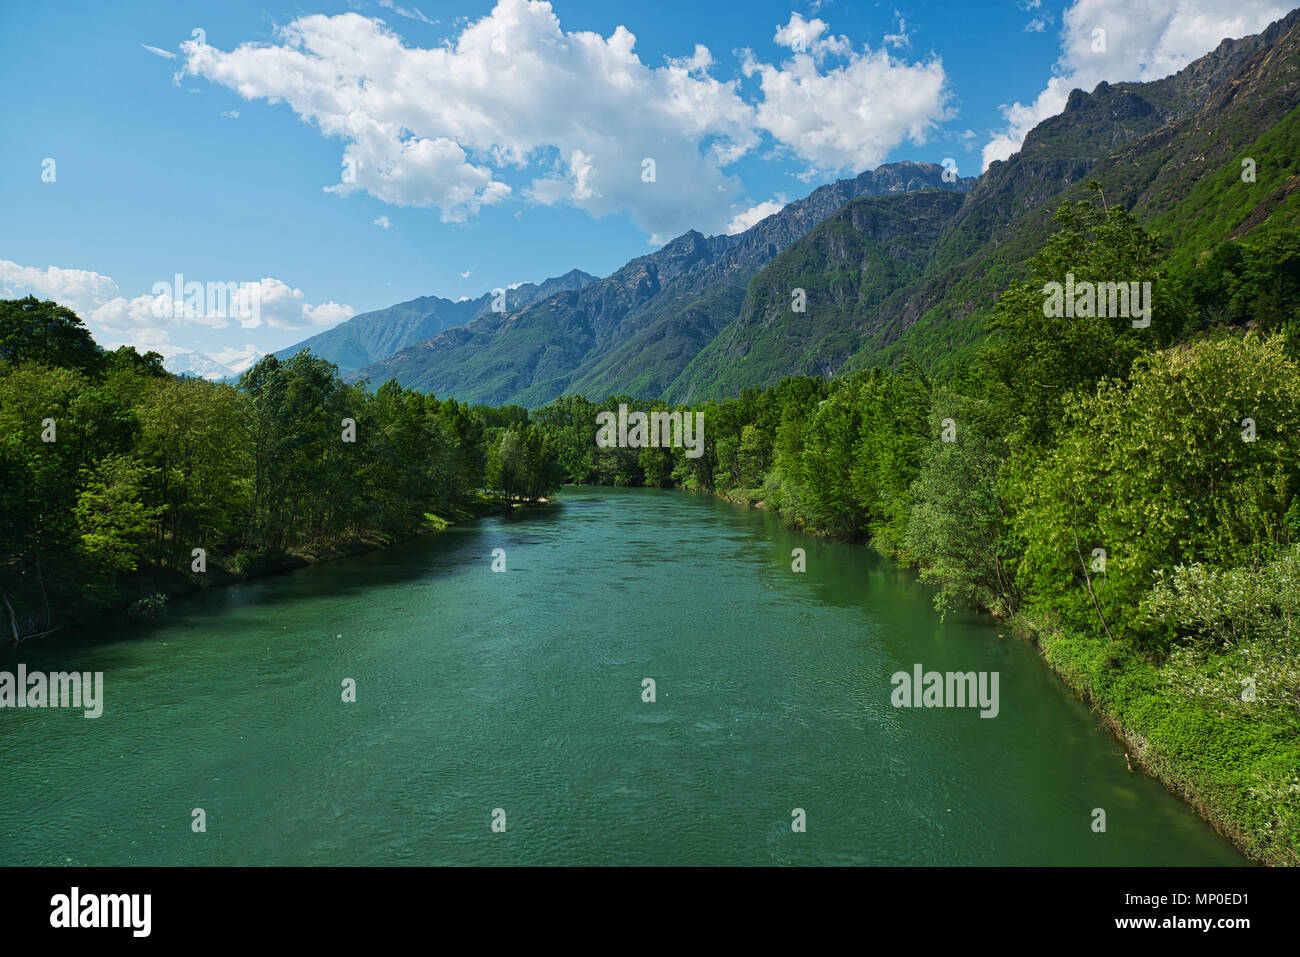 spring season on the river Toce with forest on the sides and mountains in the background and clouds in the sky Stock Photo